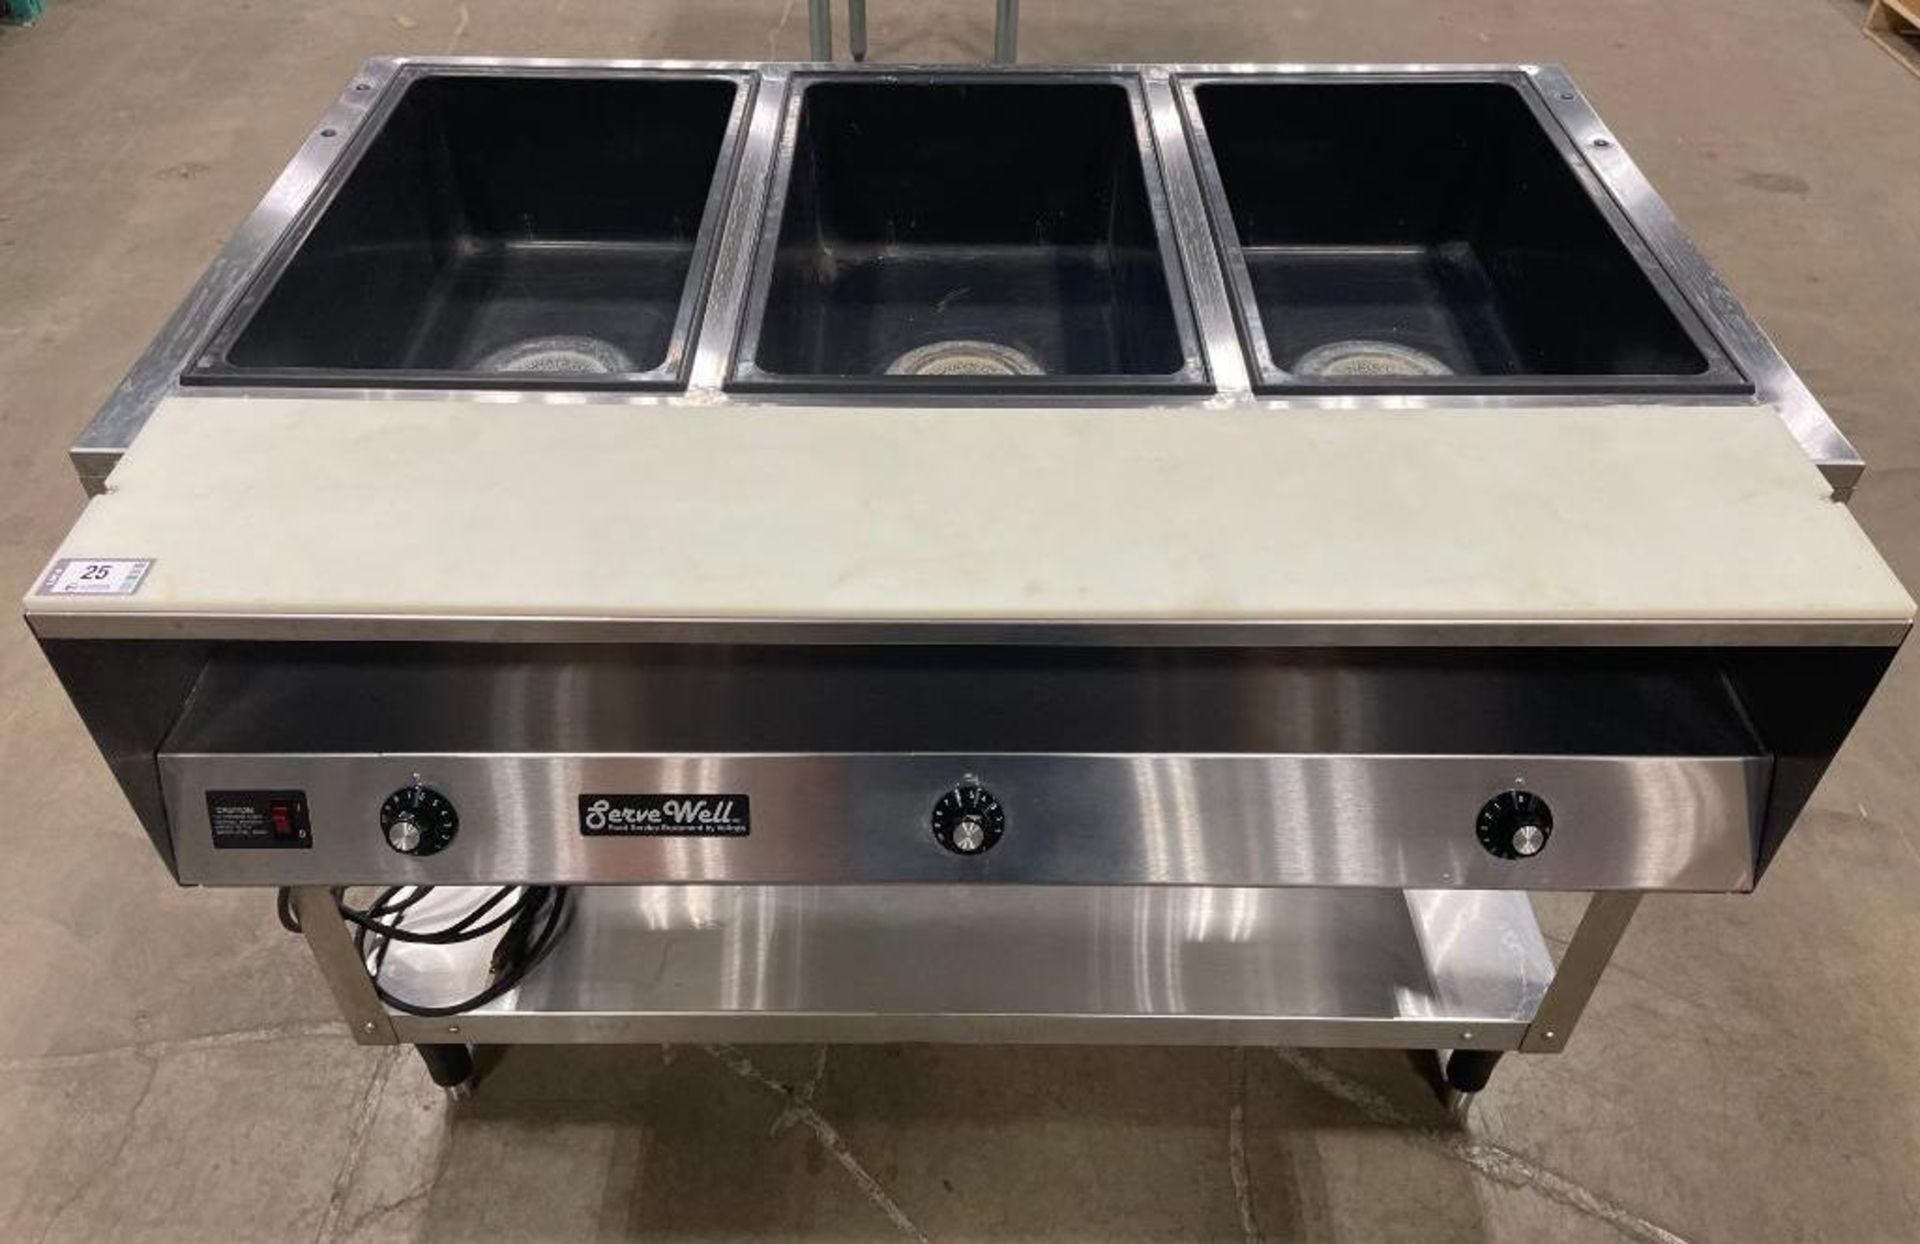 VOLLRATH 38003 3-WELL SERVEWELL STAINLESS STEEL STEAM TABLE - Image 9 of 17